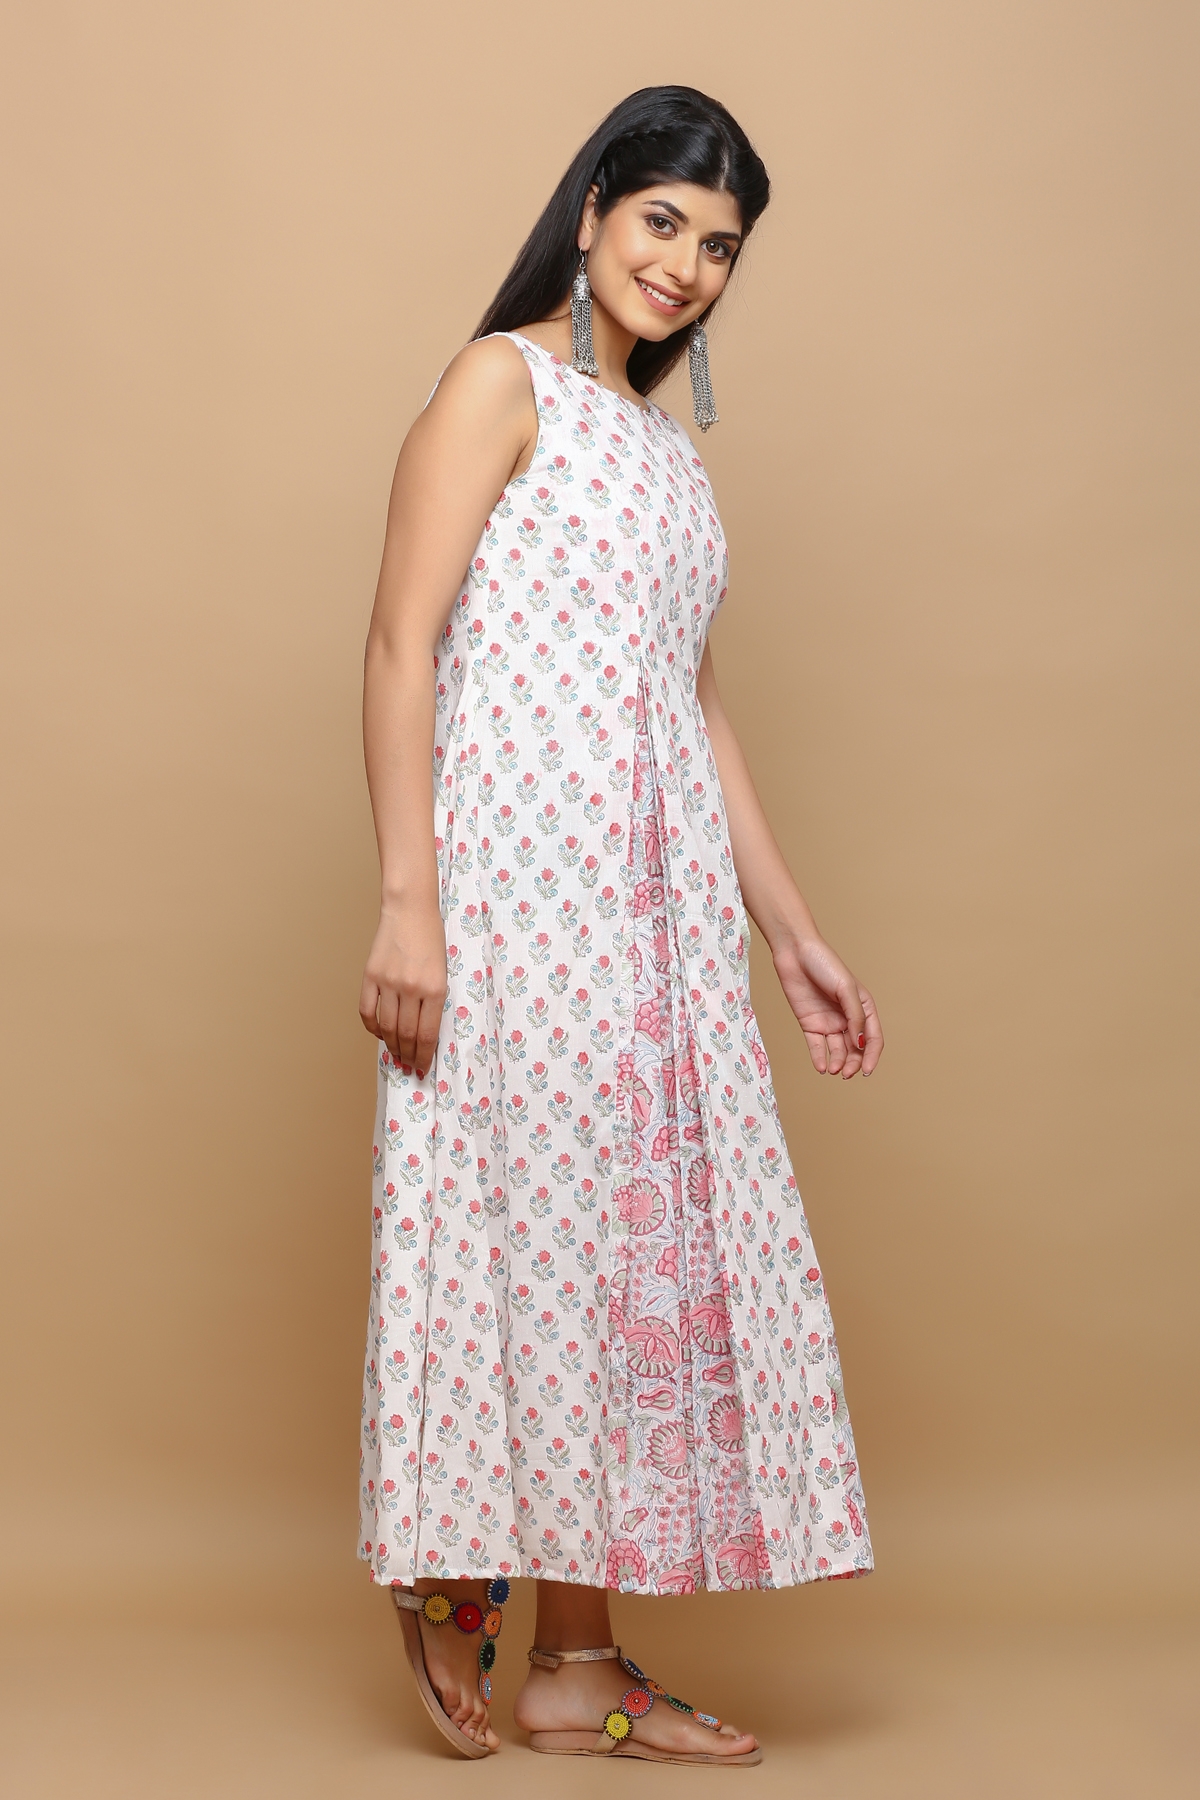 KAARAH BY KAAVYA | White buti printed dress with fish jaal kali undefined